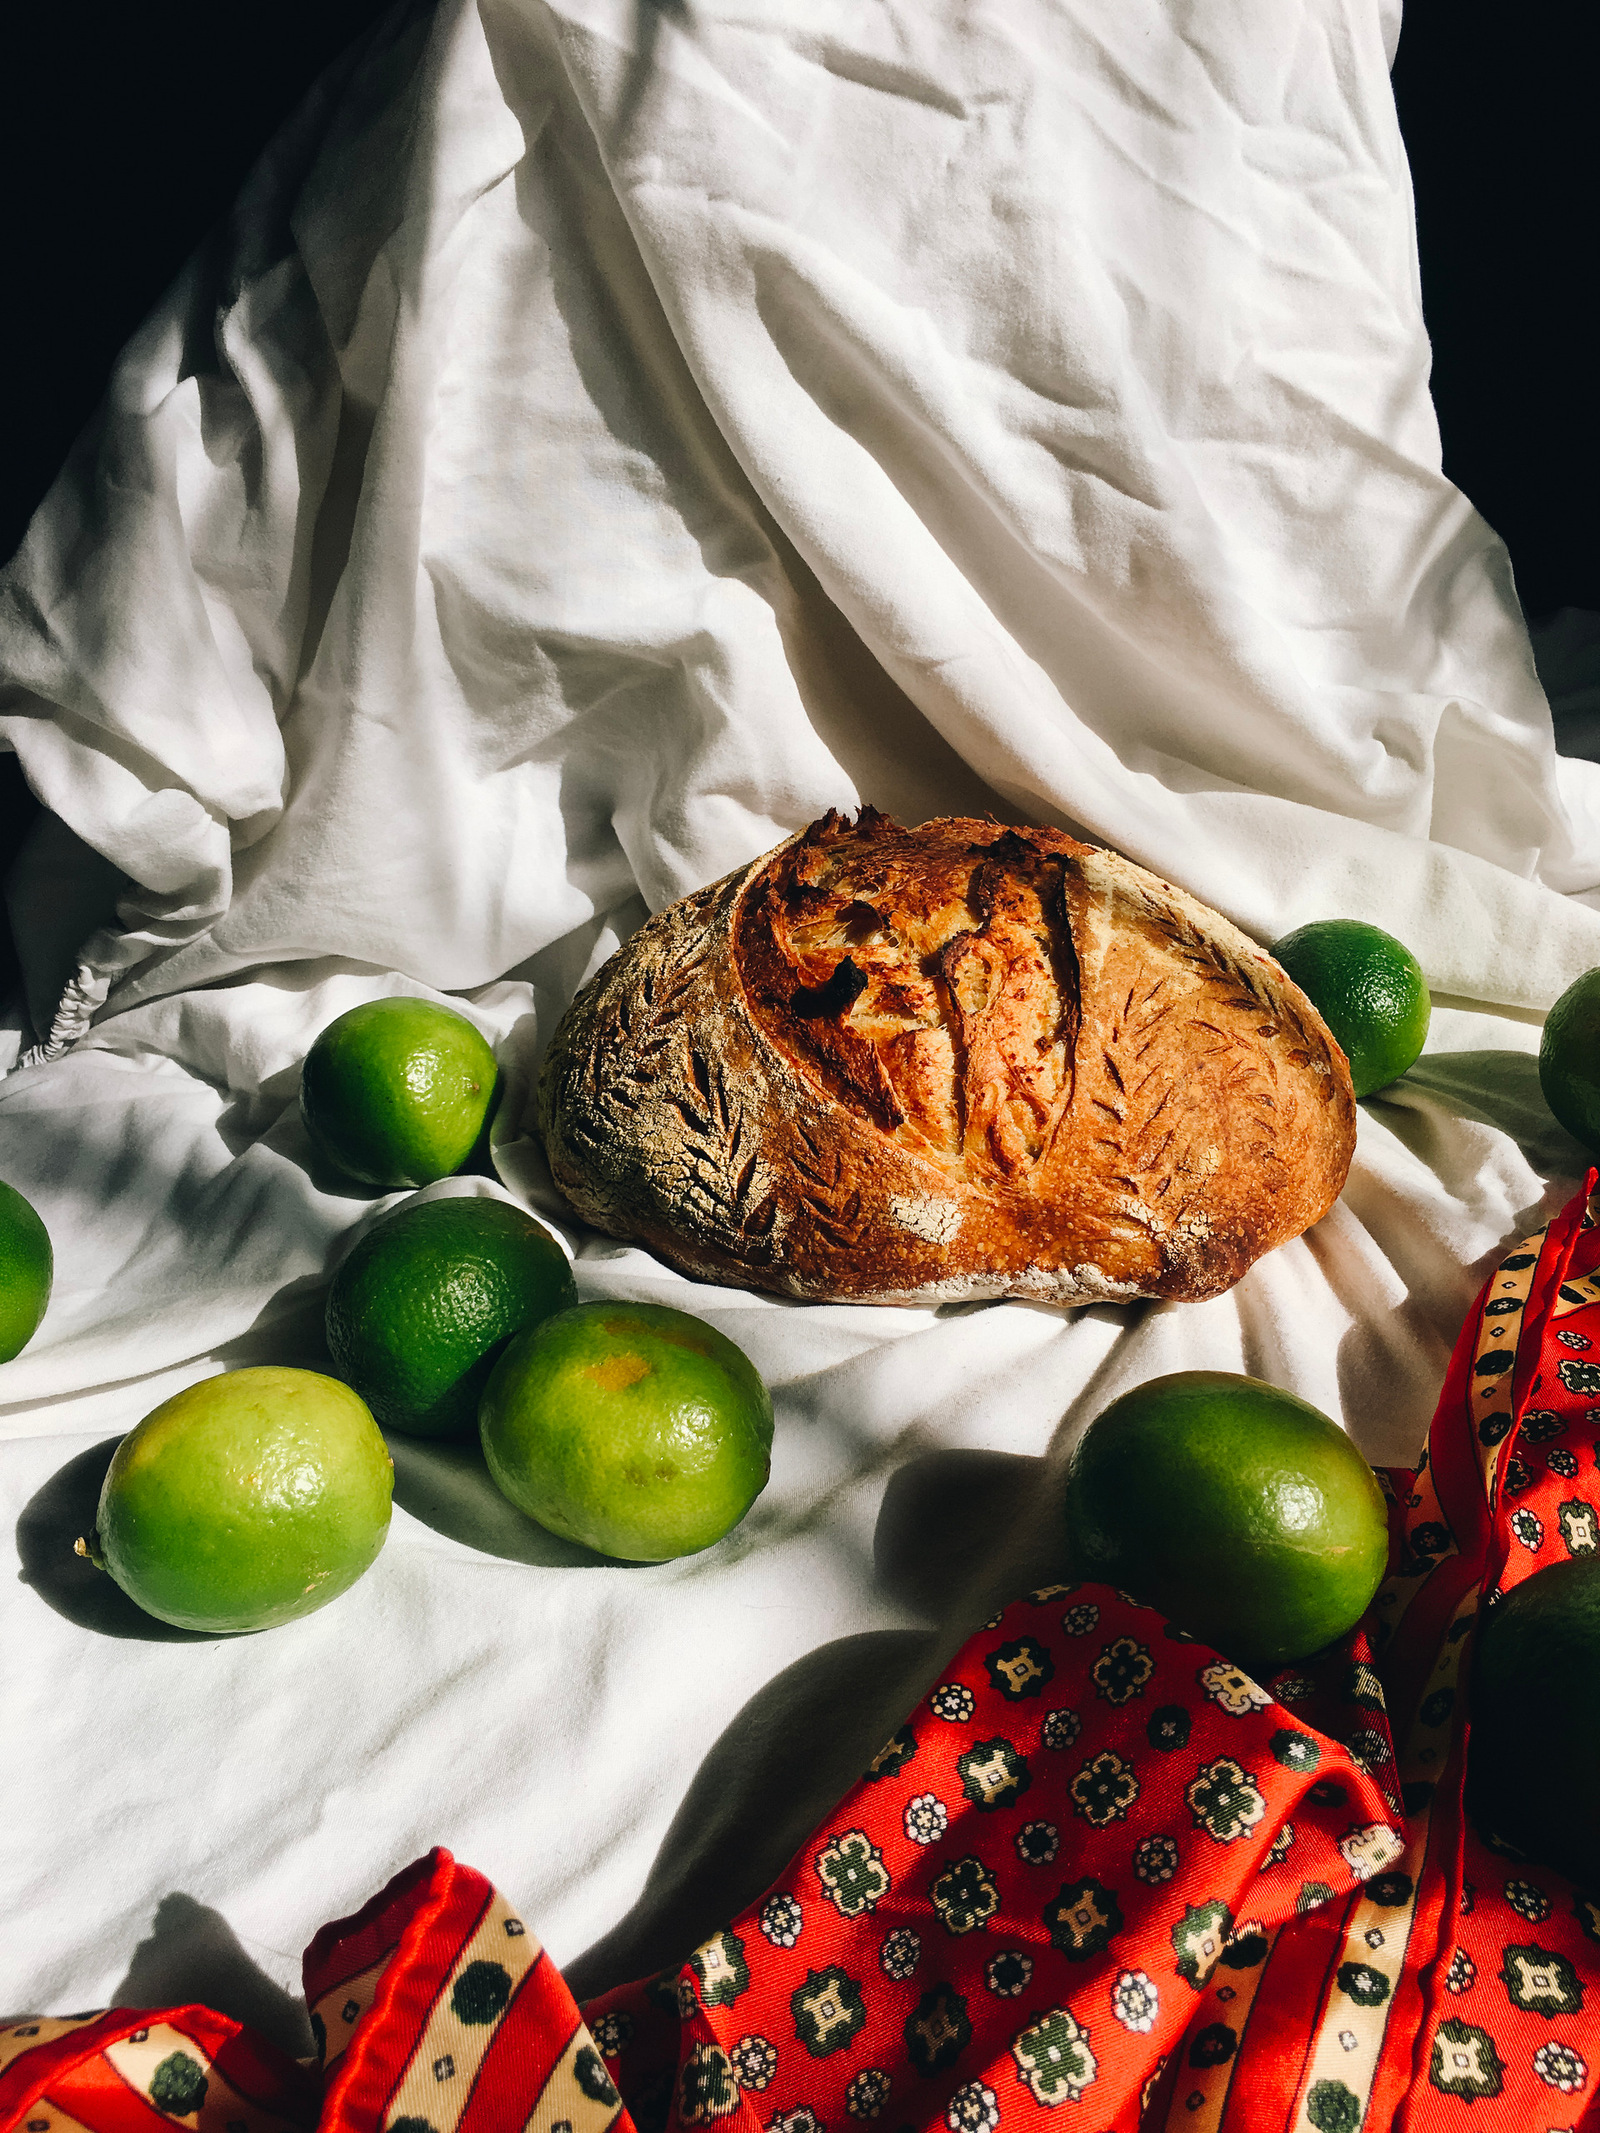 A loaf of bread and limes on white fabric